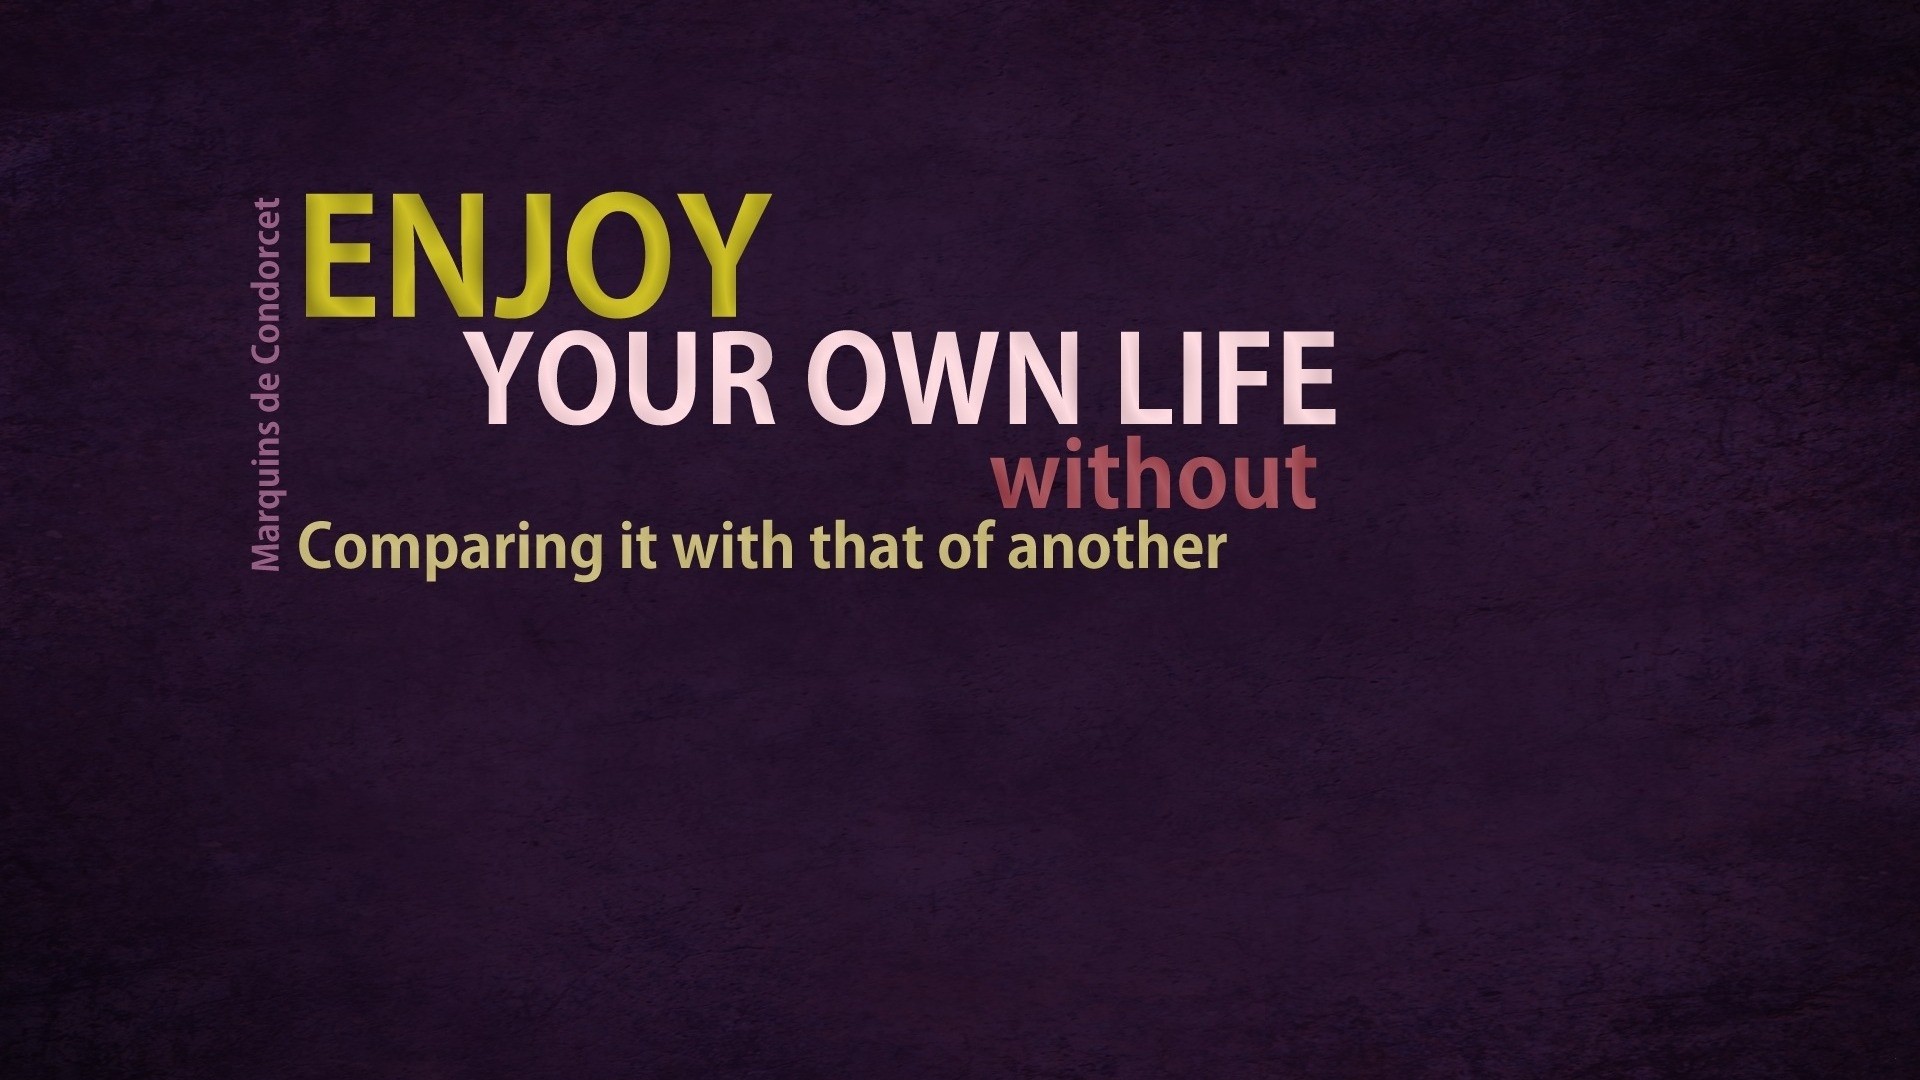 1920x1080 hd desktop wallpapers with life quotes-2 - HD Widescreen Wallpapers